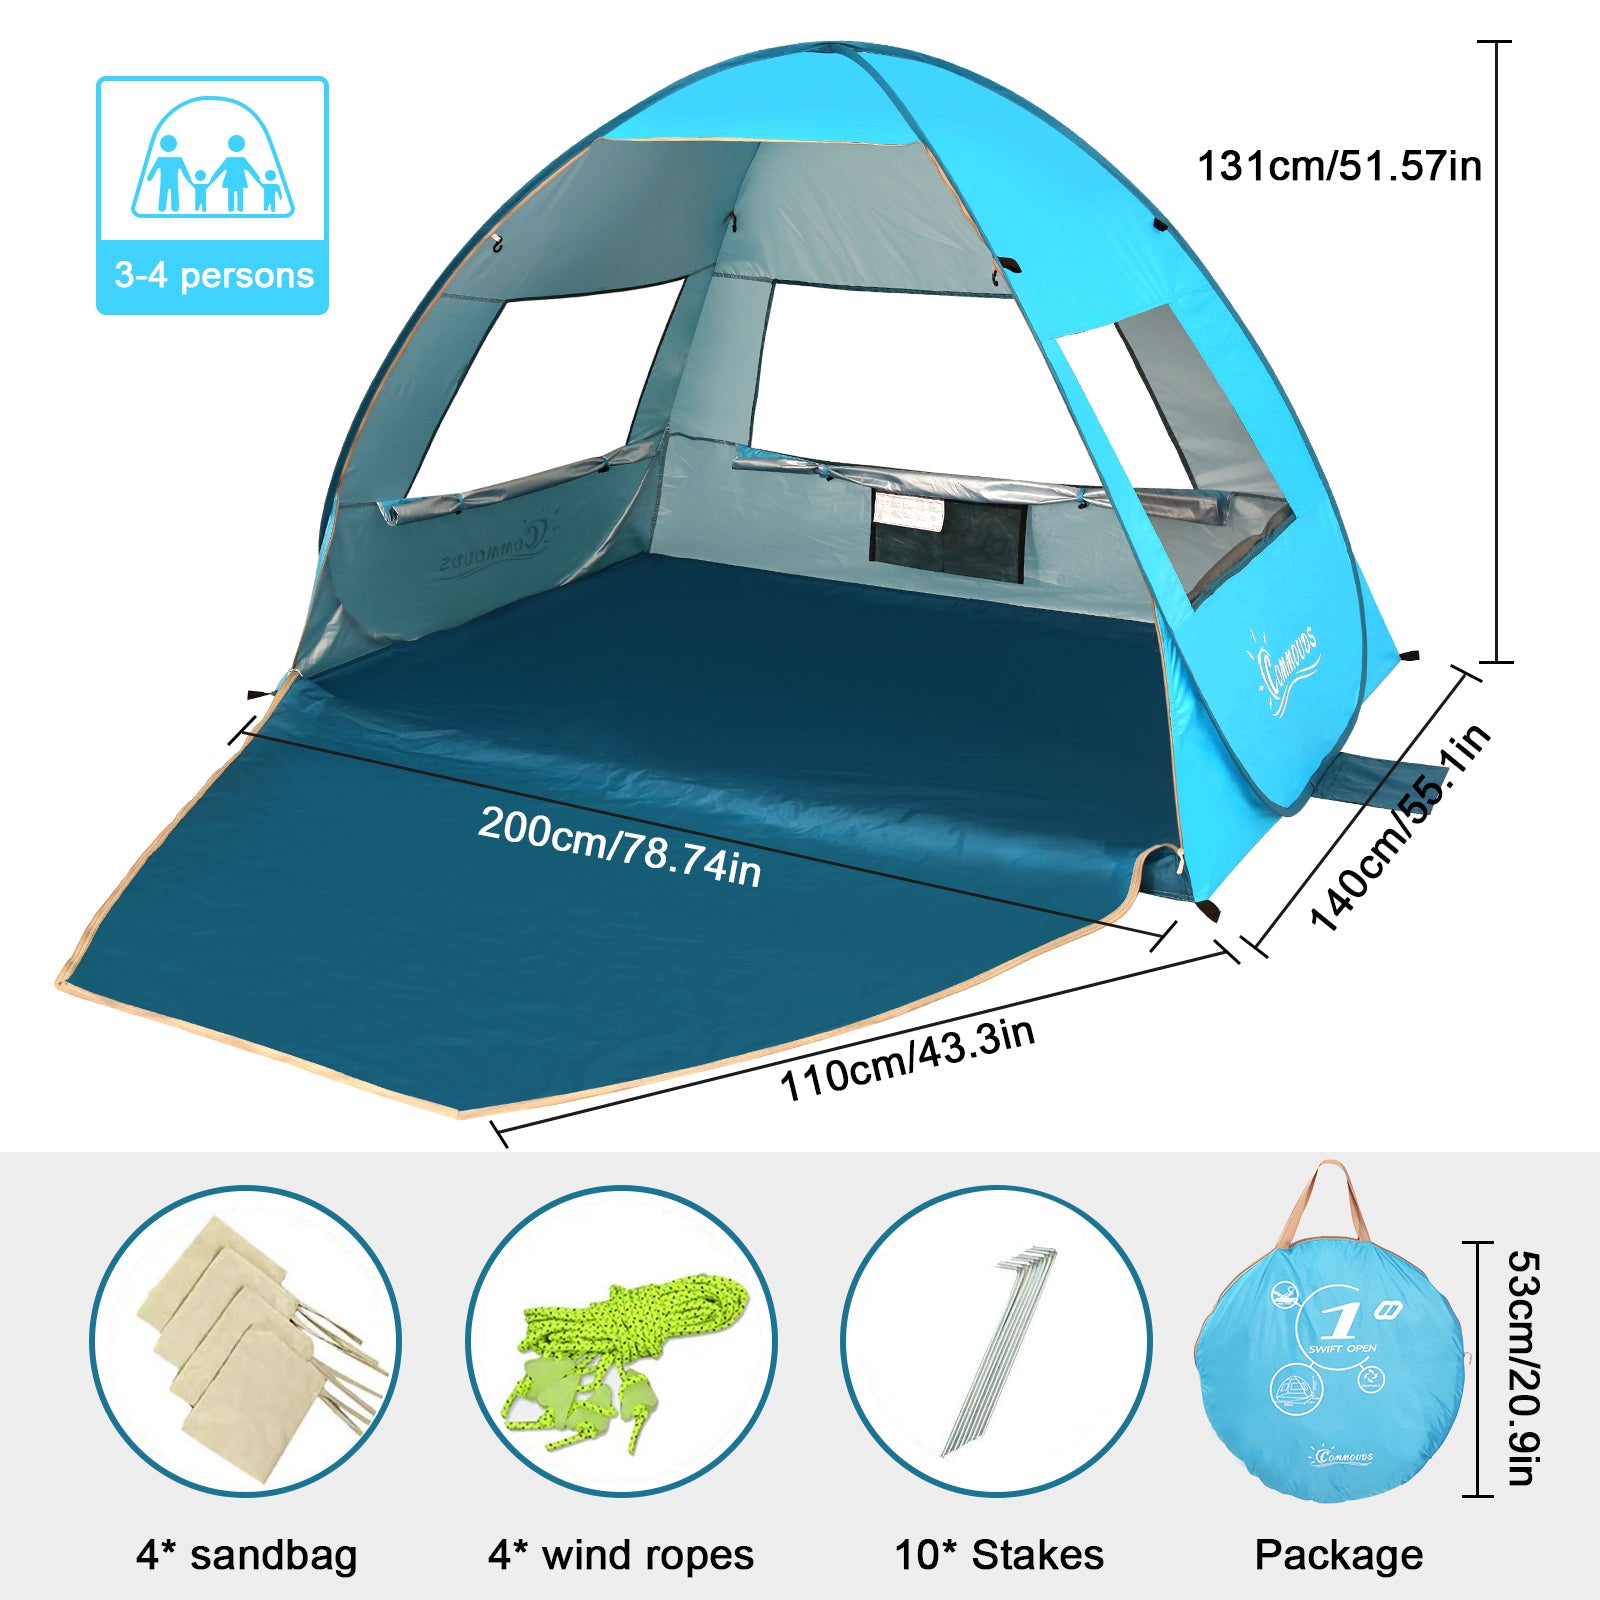 Large Pop Up Beach Tent for 3-4 Person, Anti-UV Beach Shelter